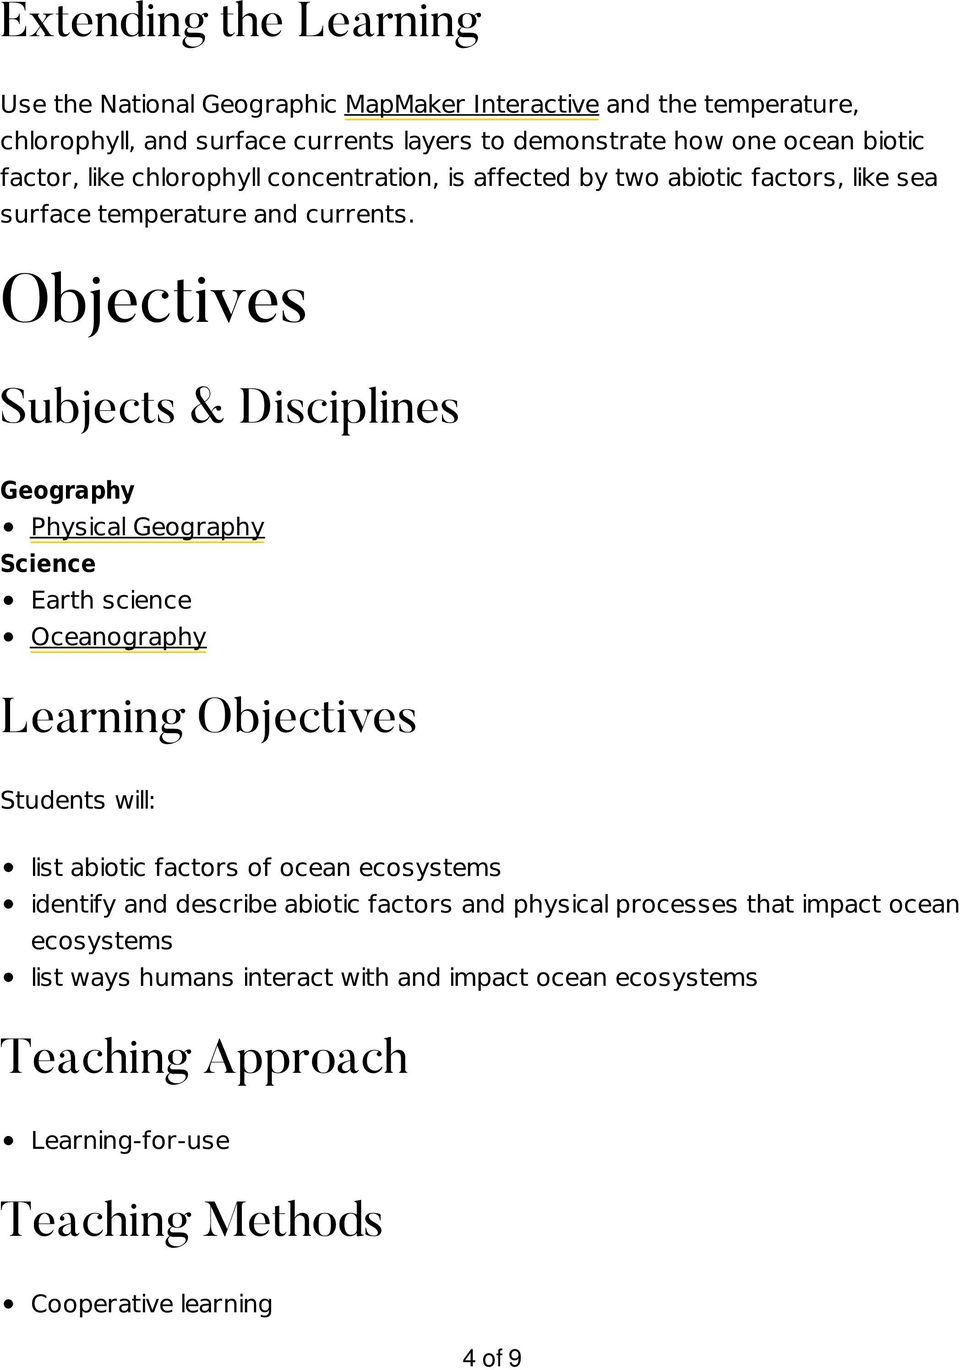 Objectives Subjects & Disciplines Geography Physical Geography Science Earth science Oceanography Learning Objectives Students will: list abiotic factors of ocean